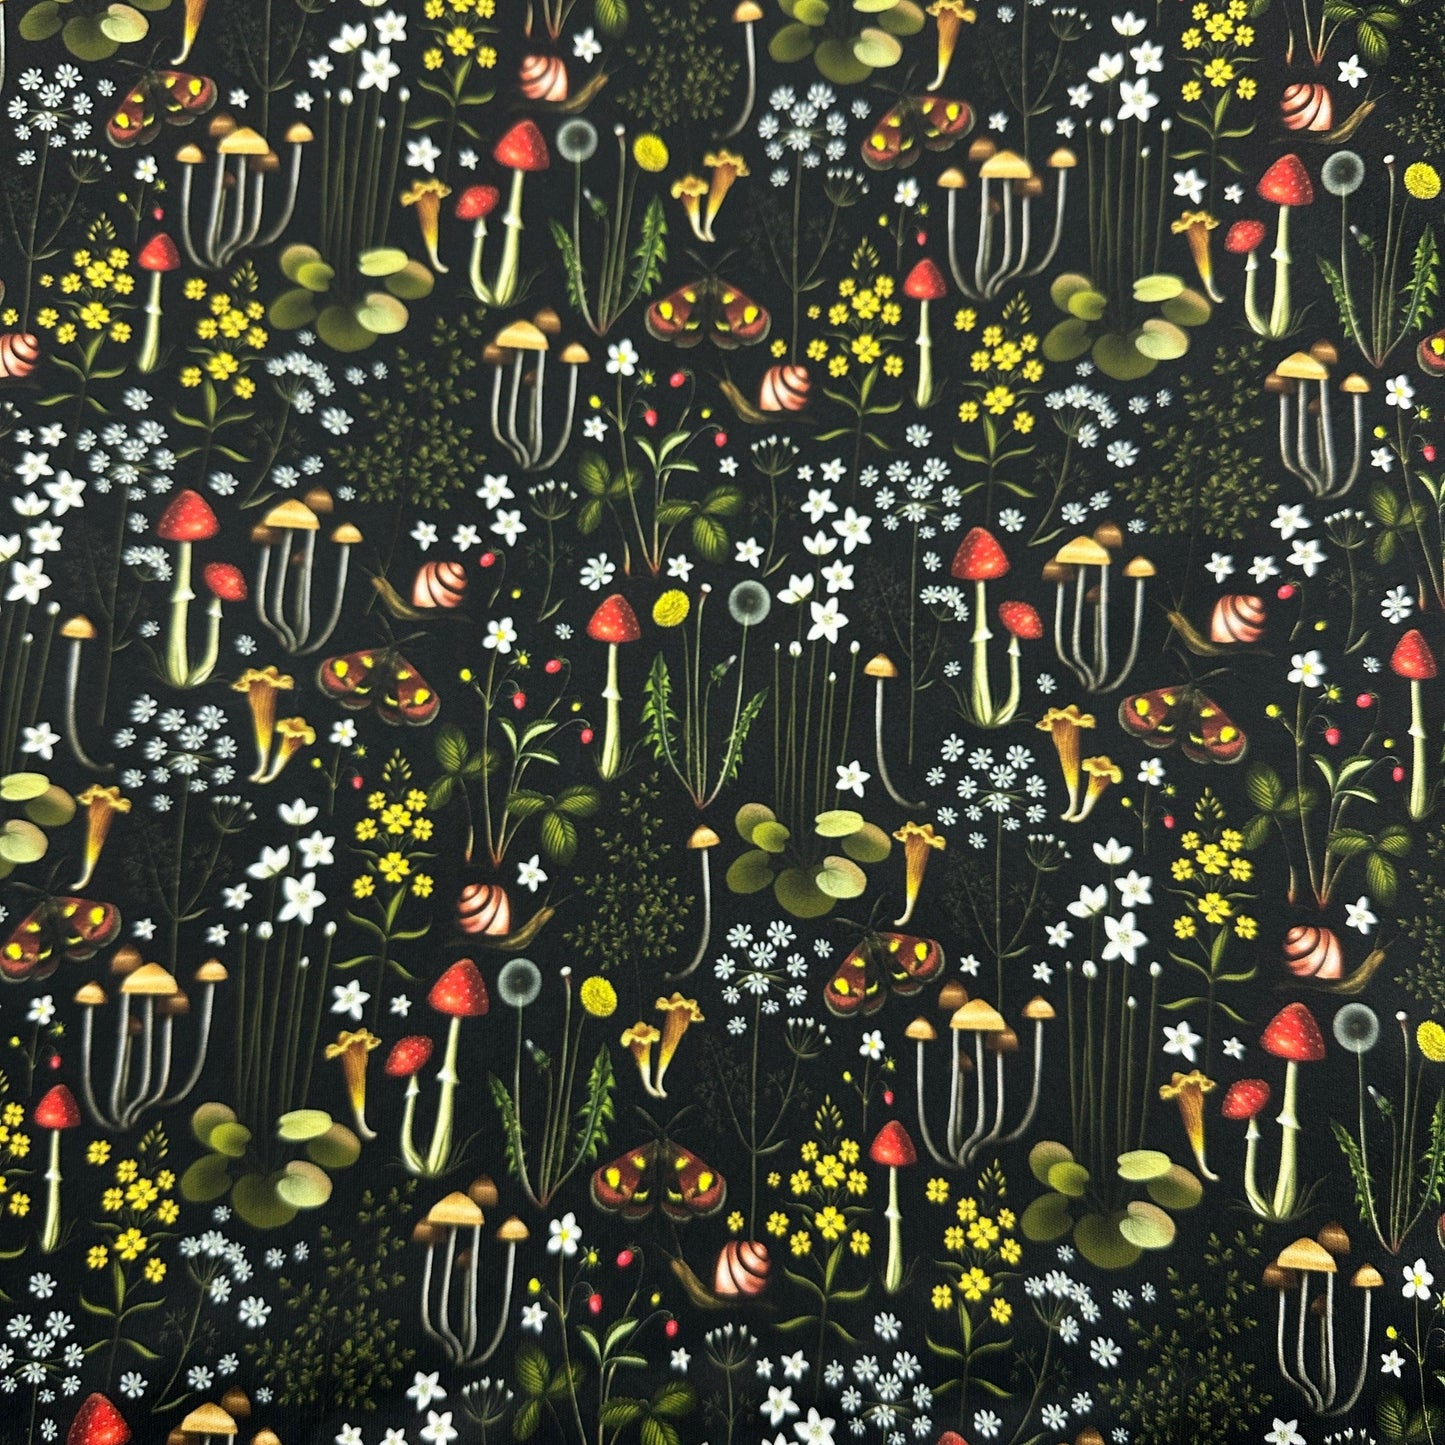 Forest Florals on Black 1 mil PUL Fabric - Made in the USA - Nature's Fabrics